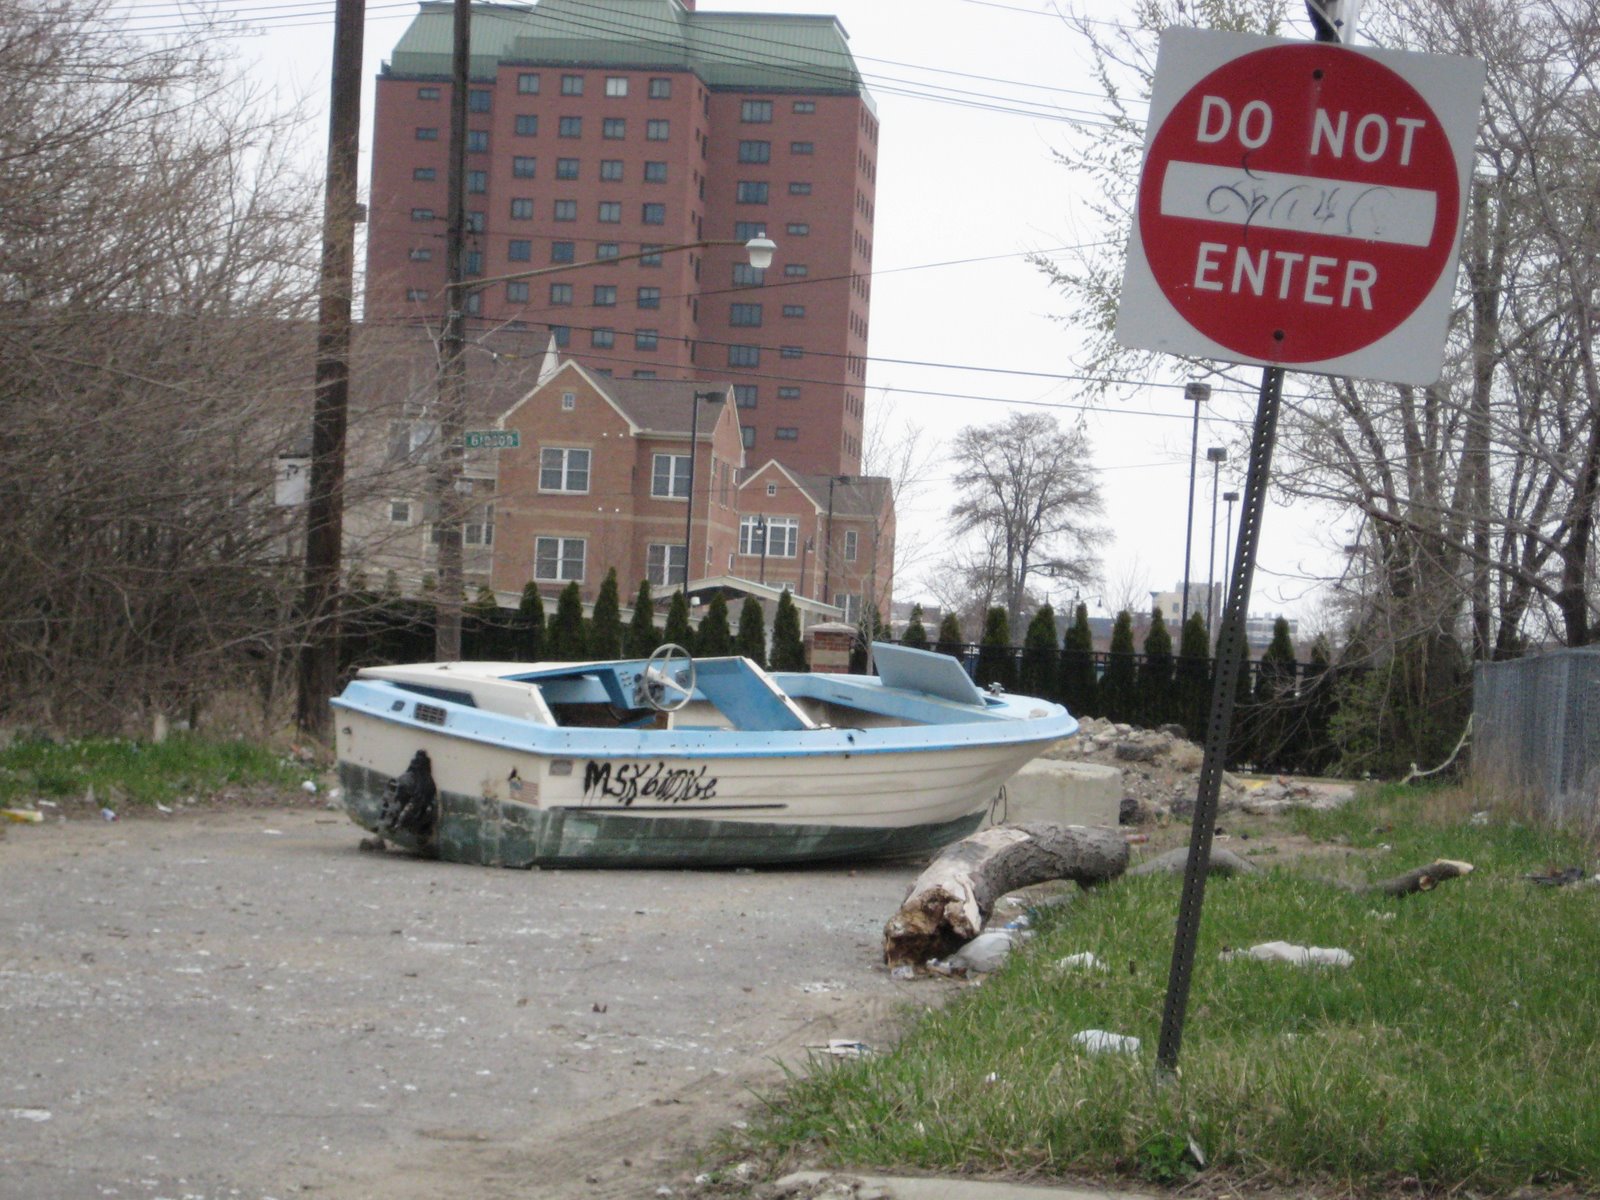 [boat+with+do+not+enter+sign.jpg]